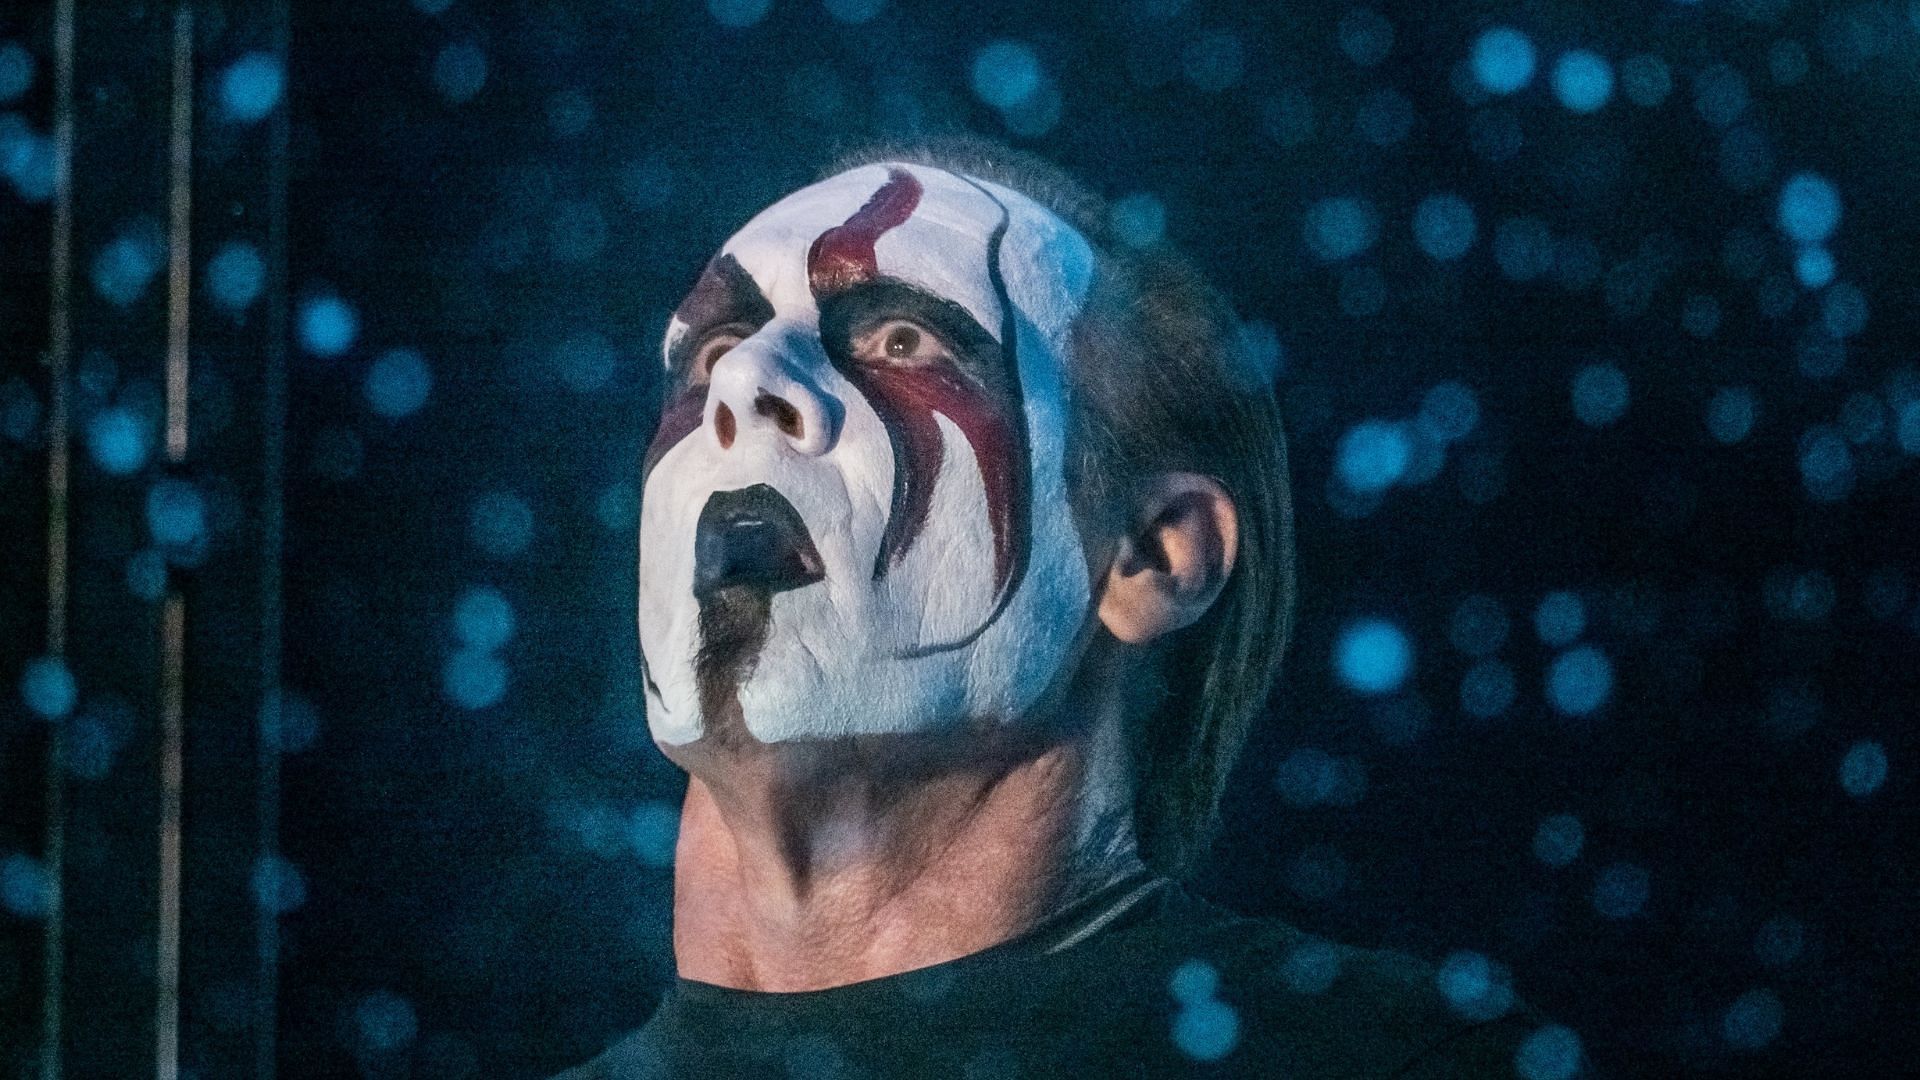 Which former WWE Superstar sees Sting as a role model?